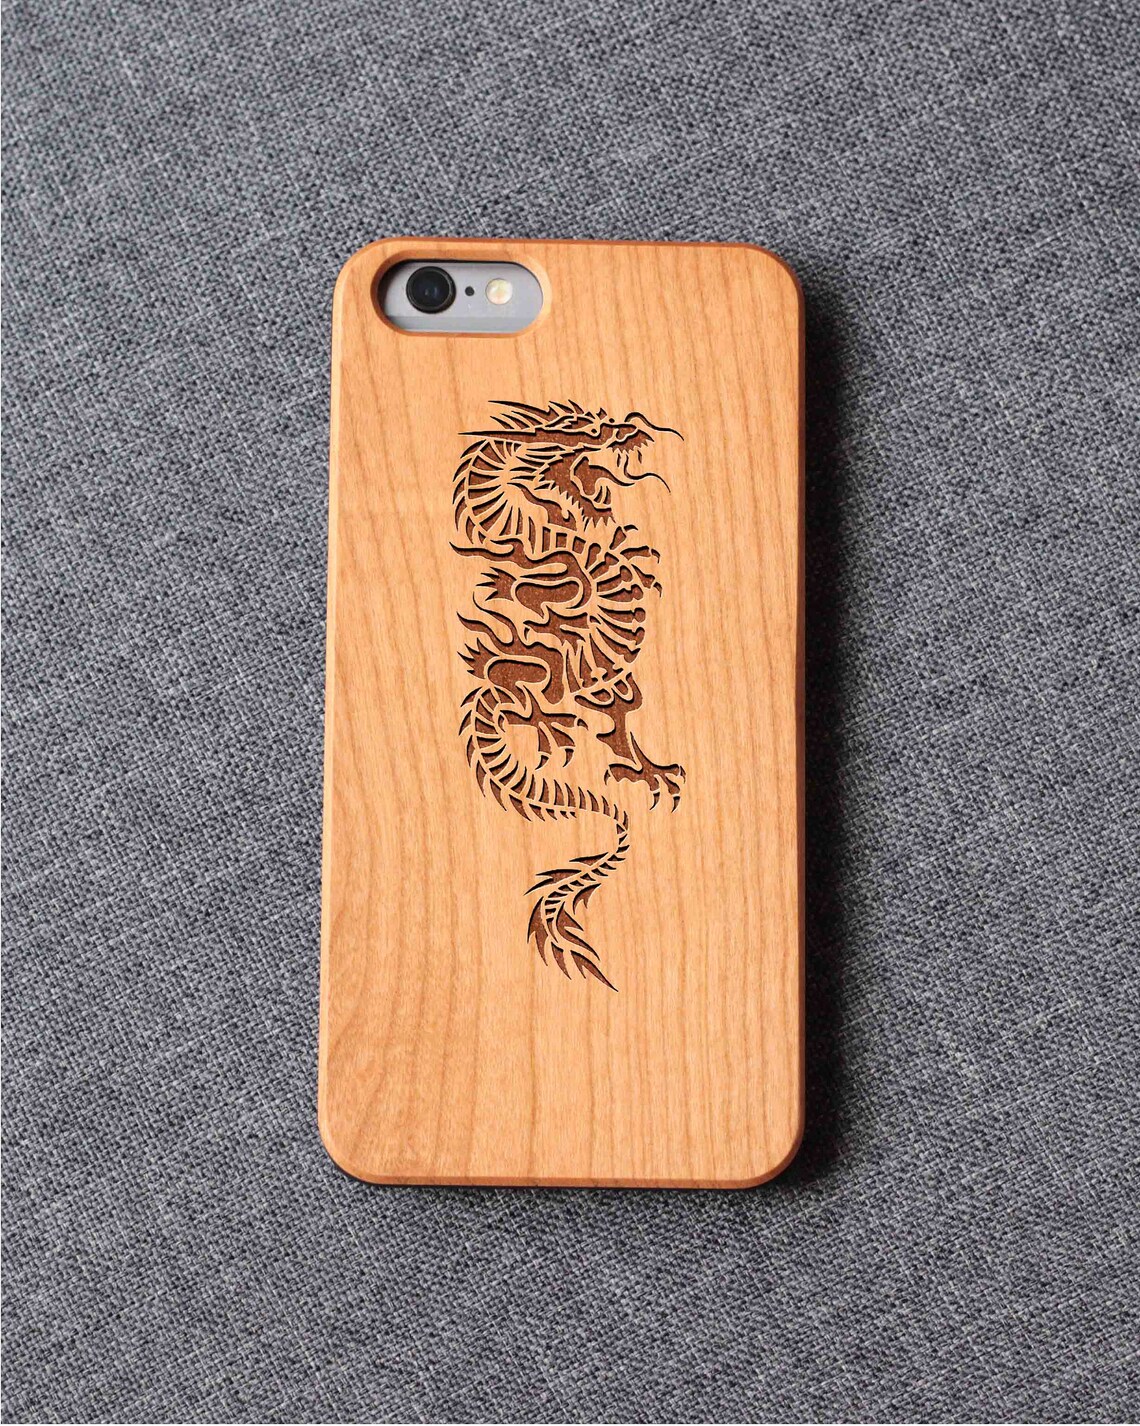 Dragon Iphone Case For 13 Mini 11 X Wood Iphone Case Iphone 12 Wood Case Iphone 13 Pro Max, Iphone 12 Case